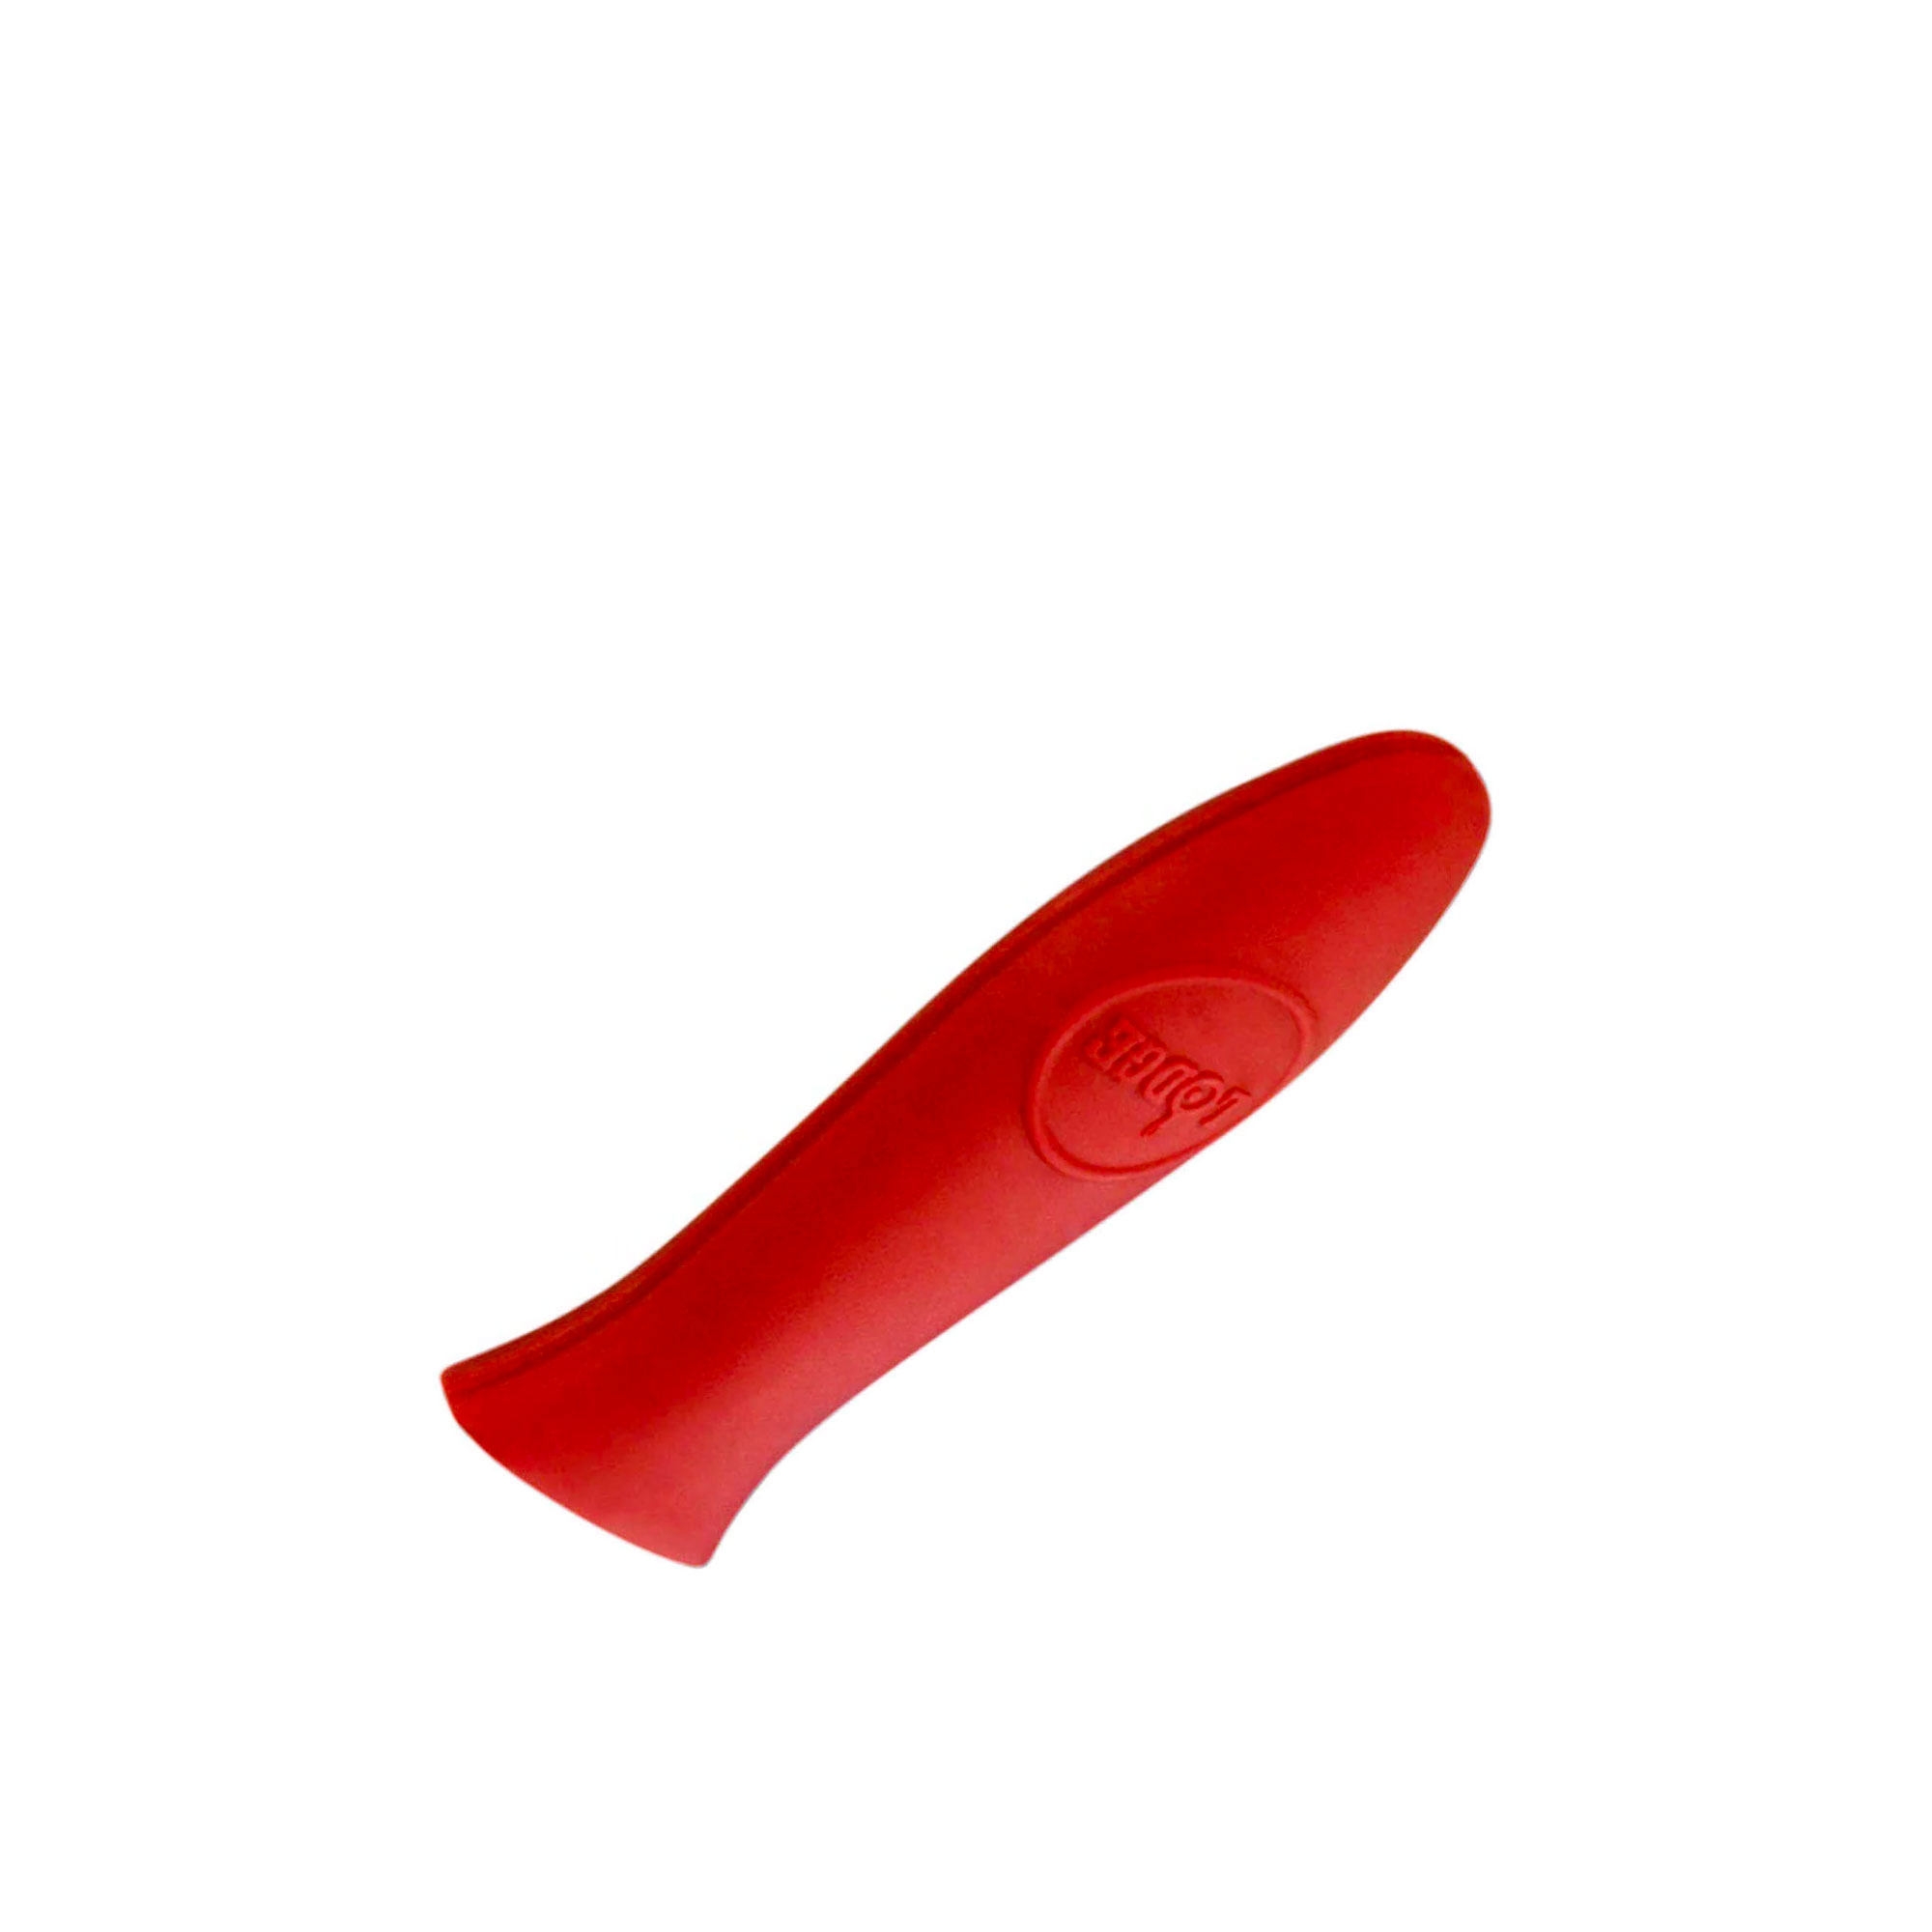 Lodge Silicone Hot Handle Holder Red Image 1